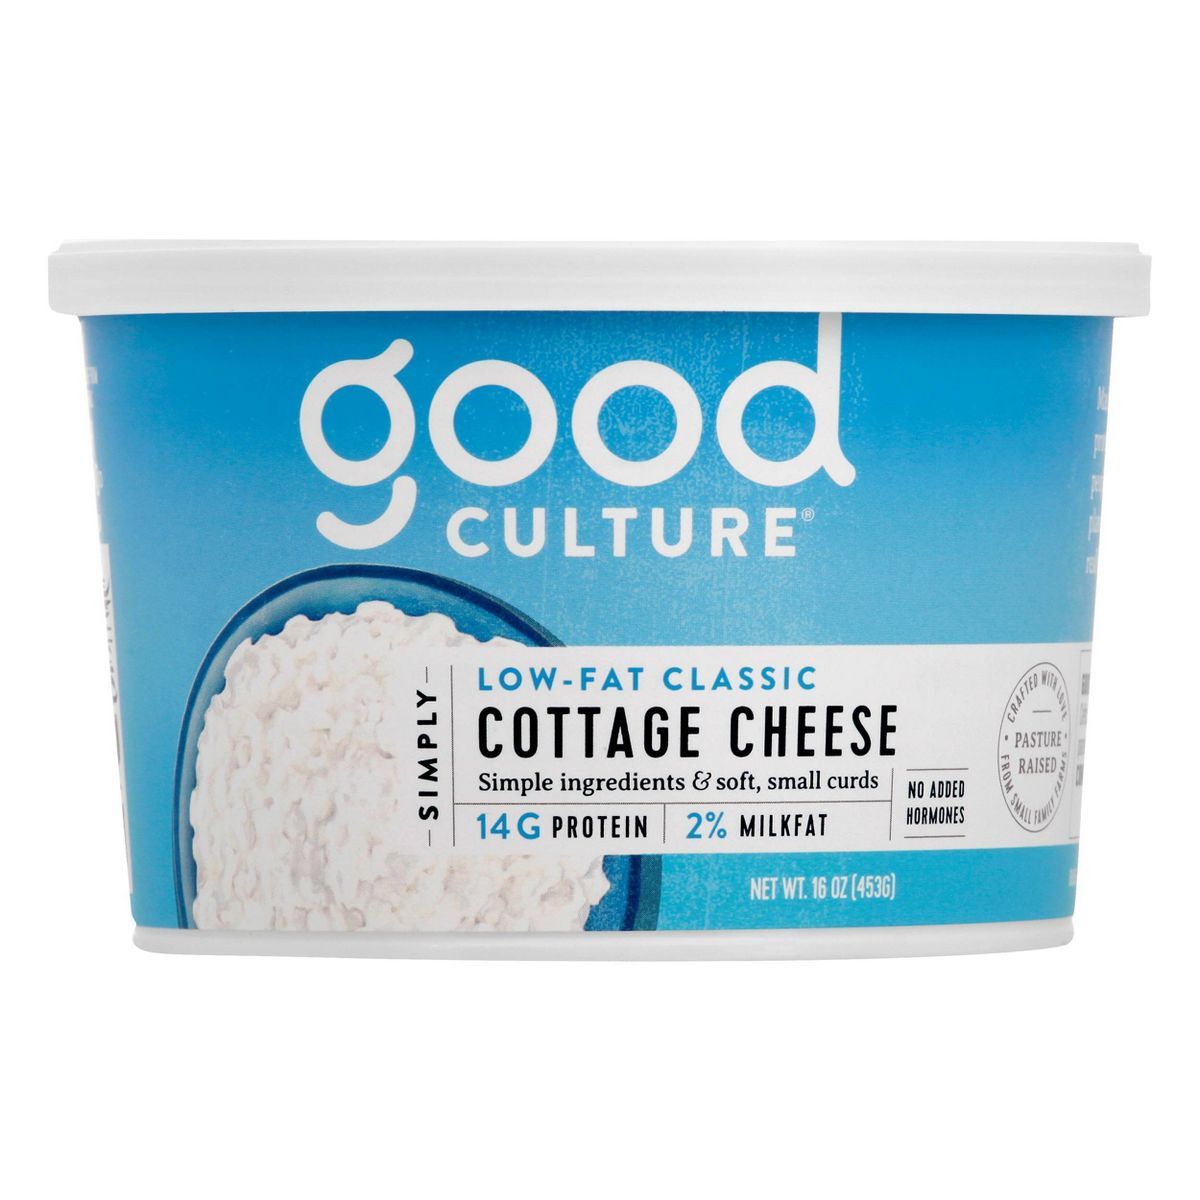 Good Culture 2% Low-Fat Classic Cottage Cheese - 16oz | Target